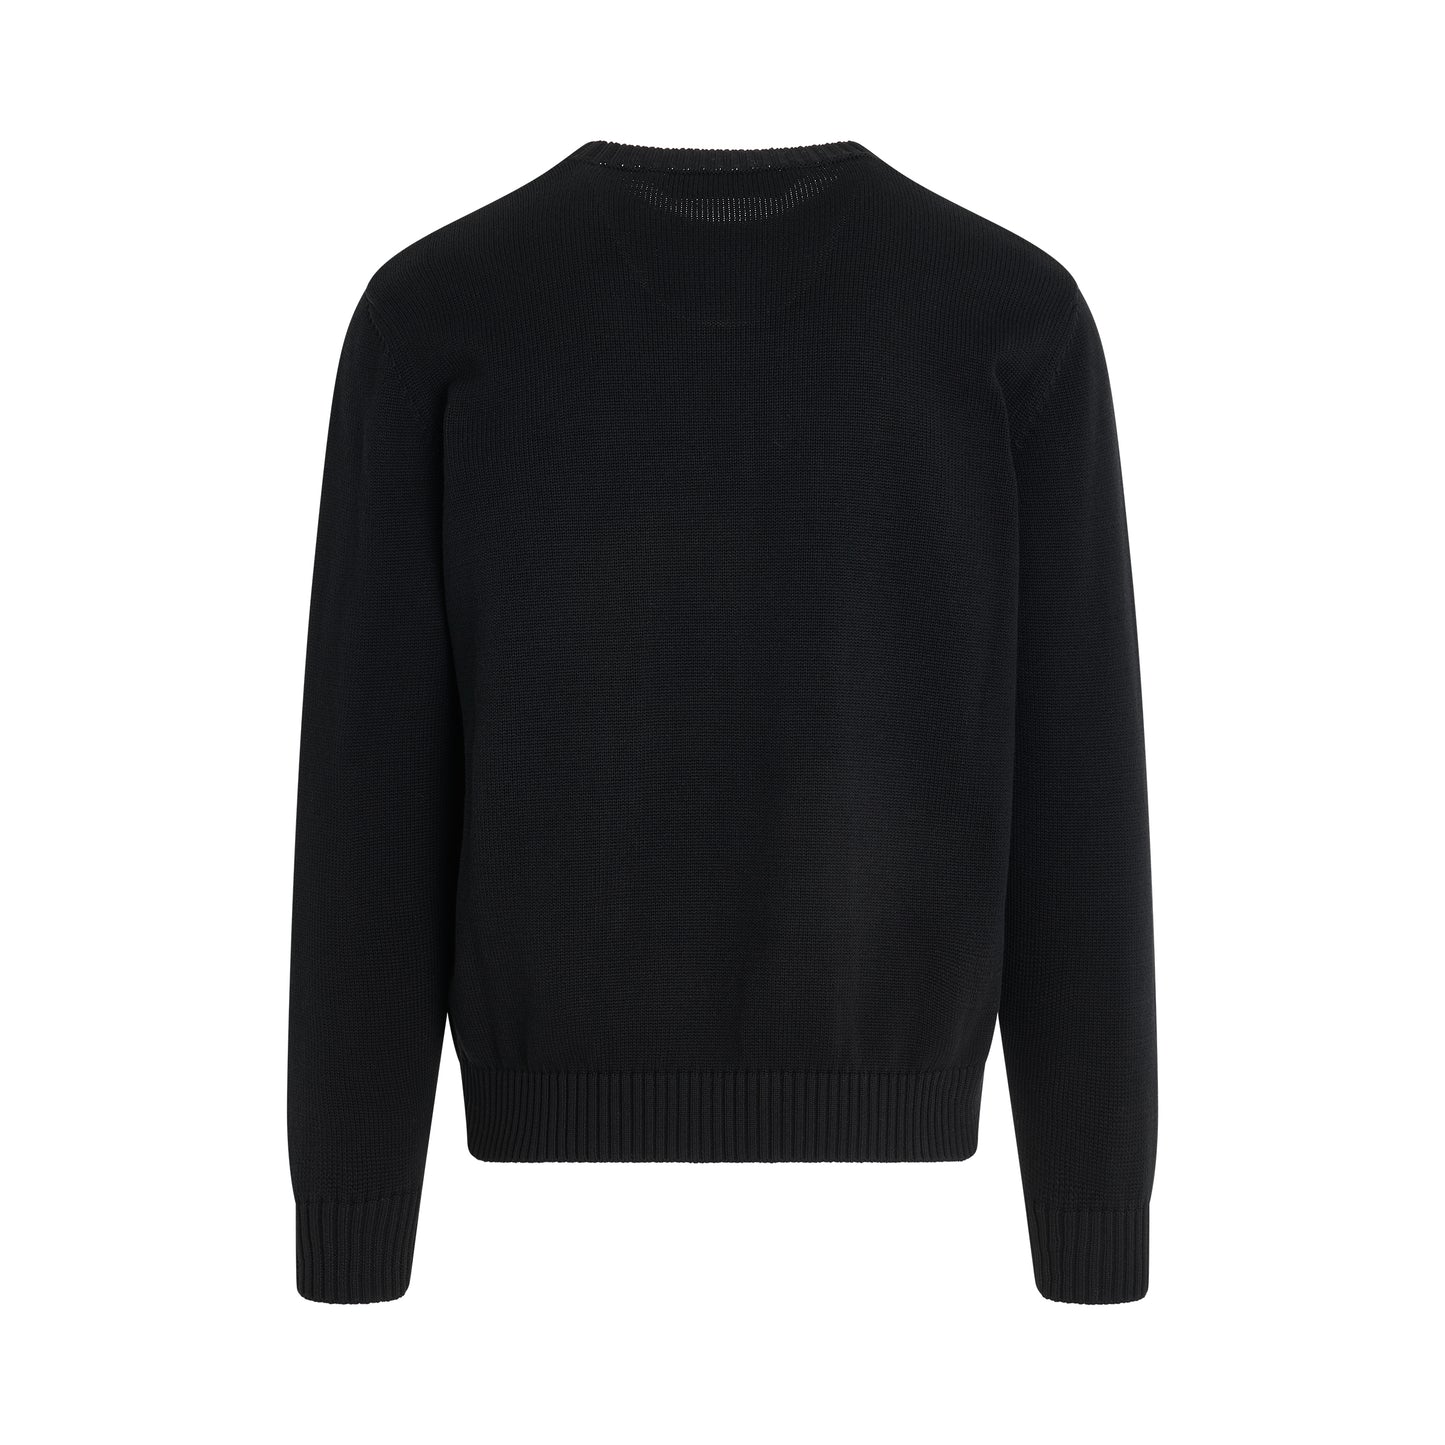 Classic Logo Round Neck Knit Sweater in Black/Off White